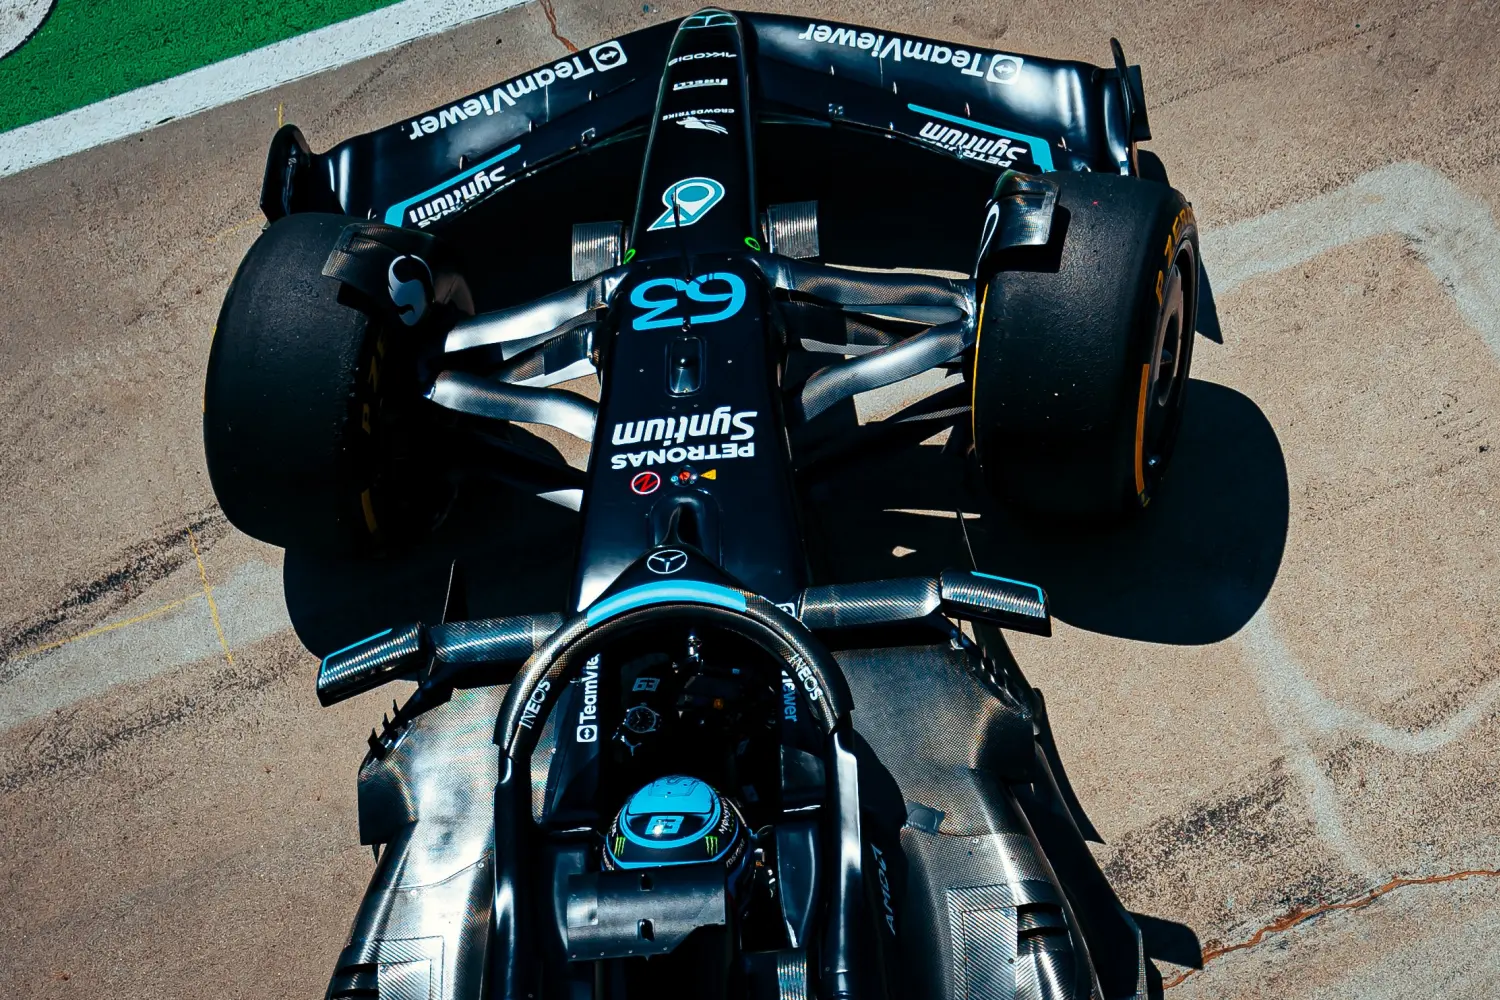 George Russell - Mercedes-AMG Petronas Formula One Team / © Mercedes-AMG Petronas Formula One Team / LAT Images